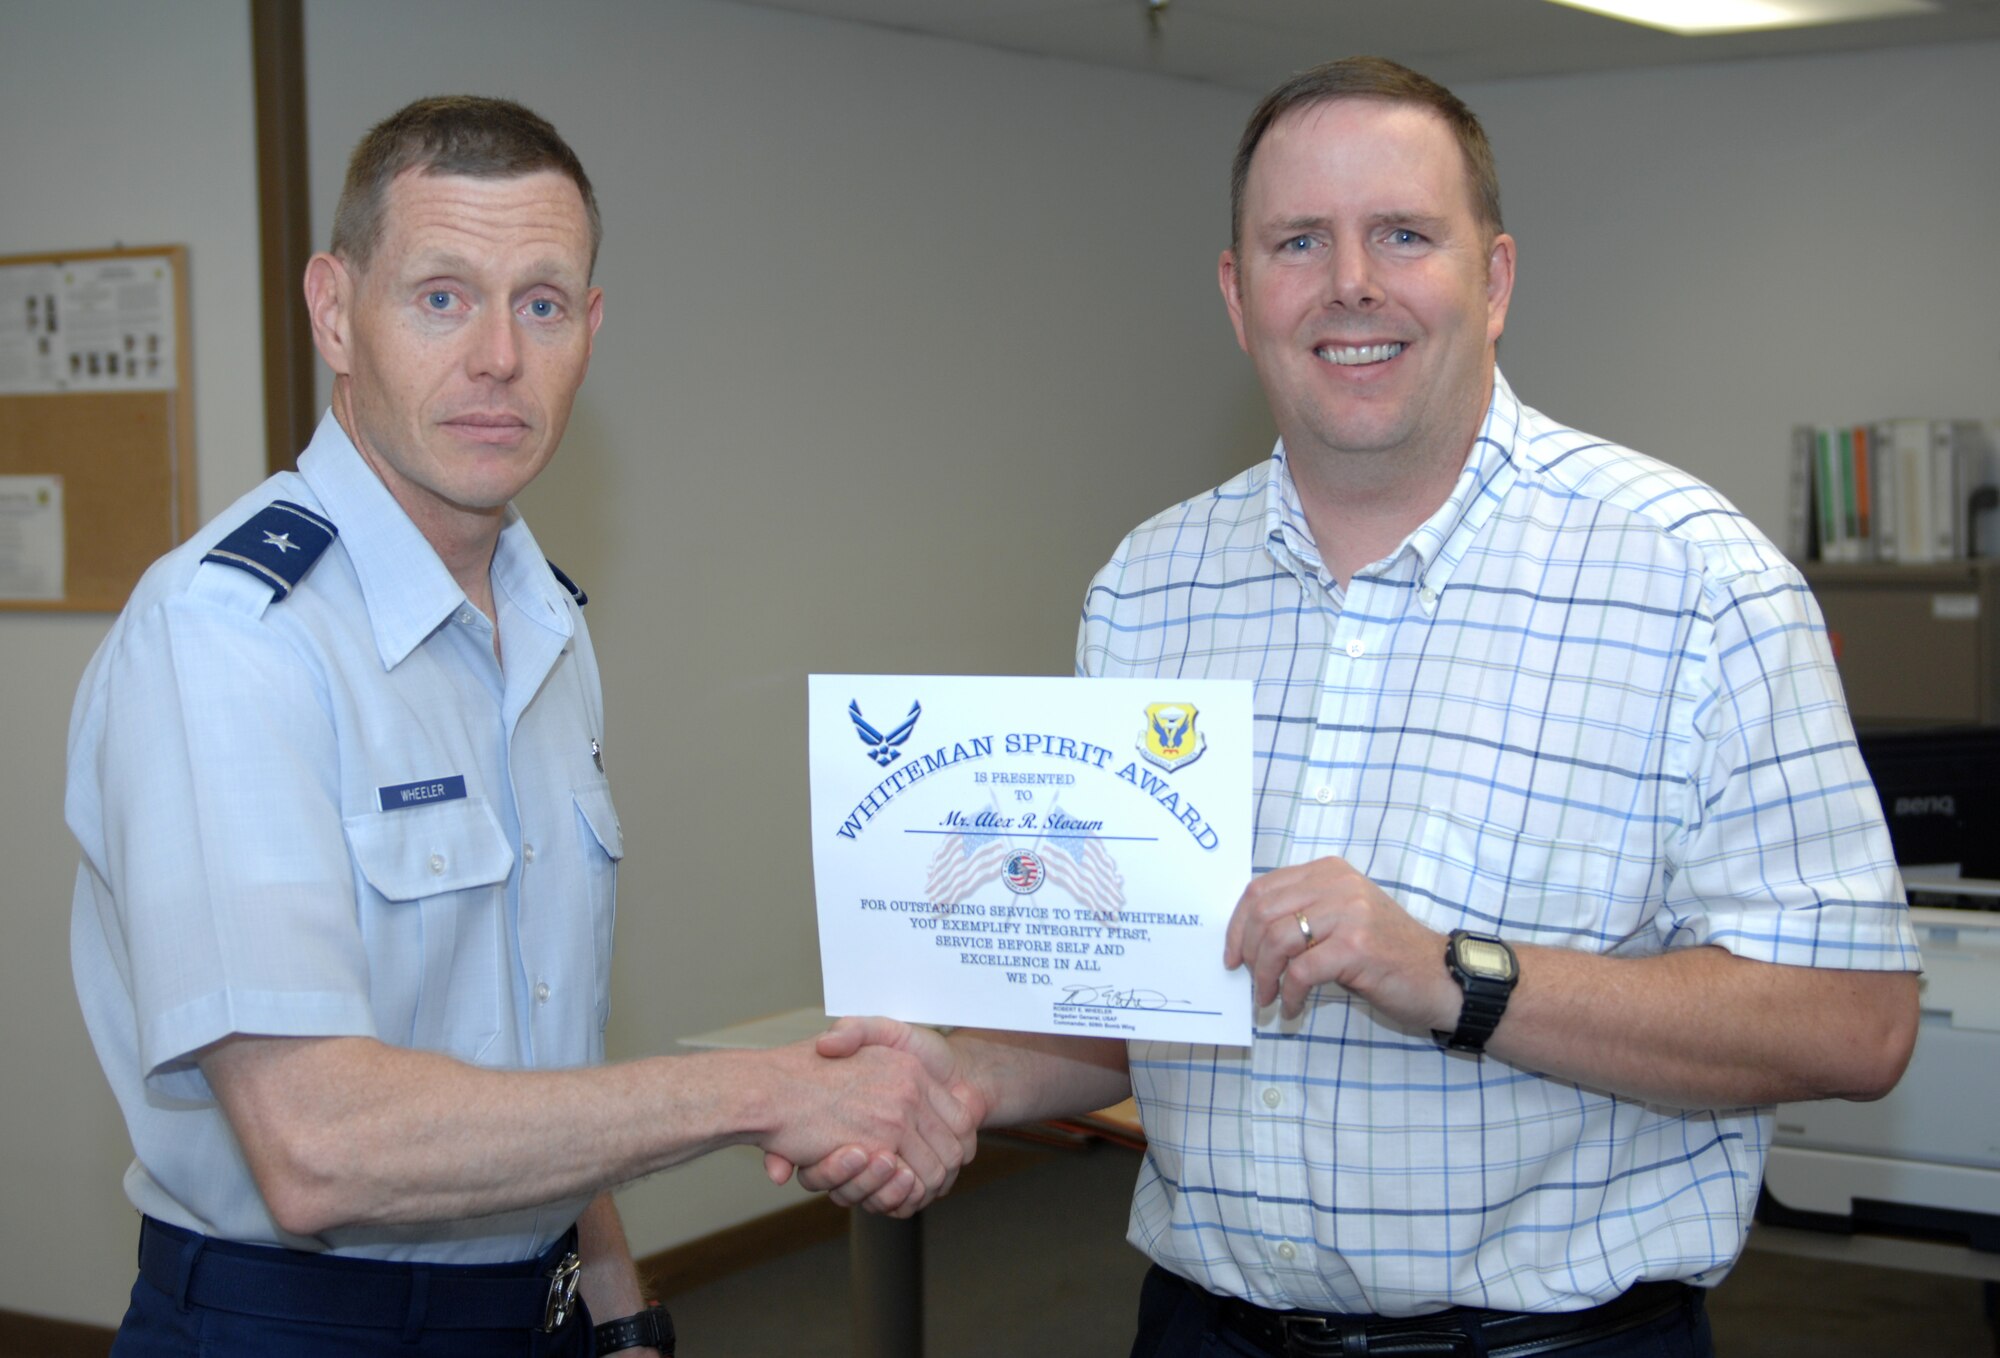 WHITEMAN AIR FORCE BASE, Mo. - The 509th Bomb Wing commander, Brig. Gen. Robert Wheeler, presents Alex Slocum, 509th BW information protection specialist, with the Whiteman Spirit Award July 12. (U.S. Air Force photo by Airman 1st Class Cody H. Ramirez)